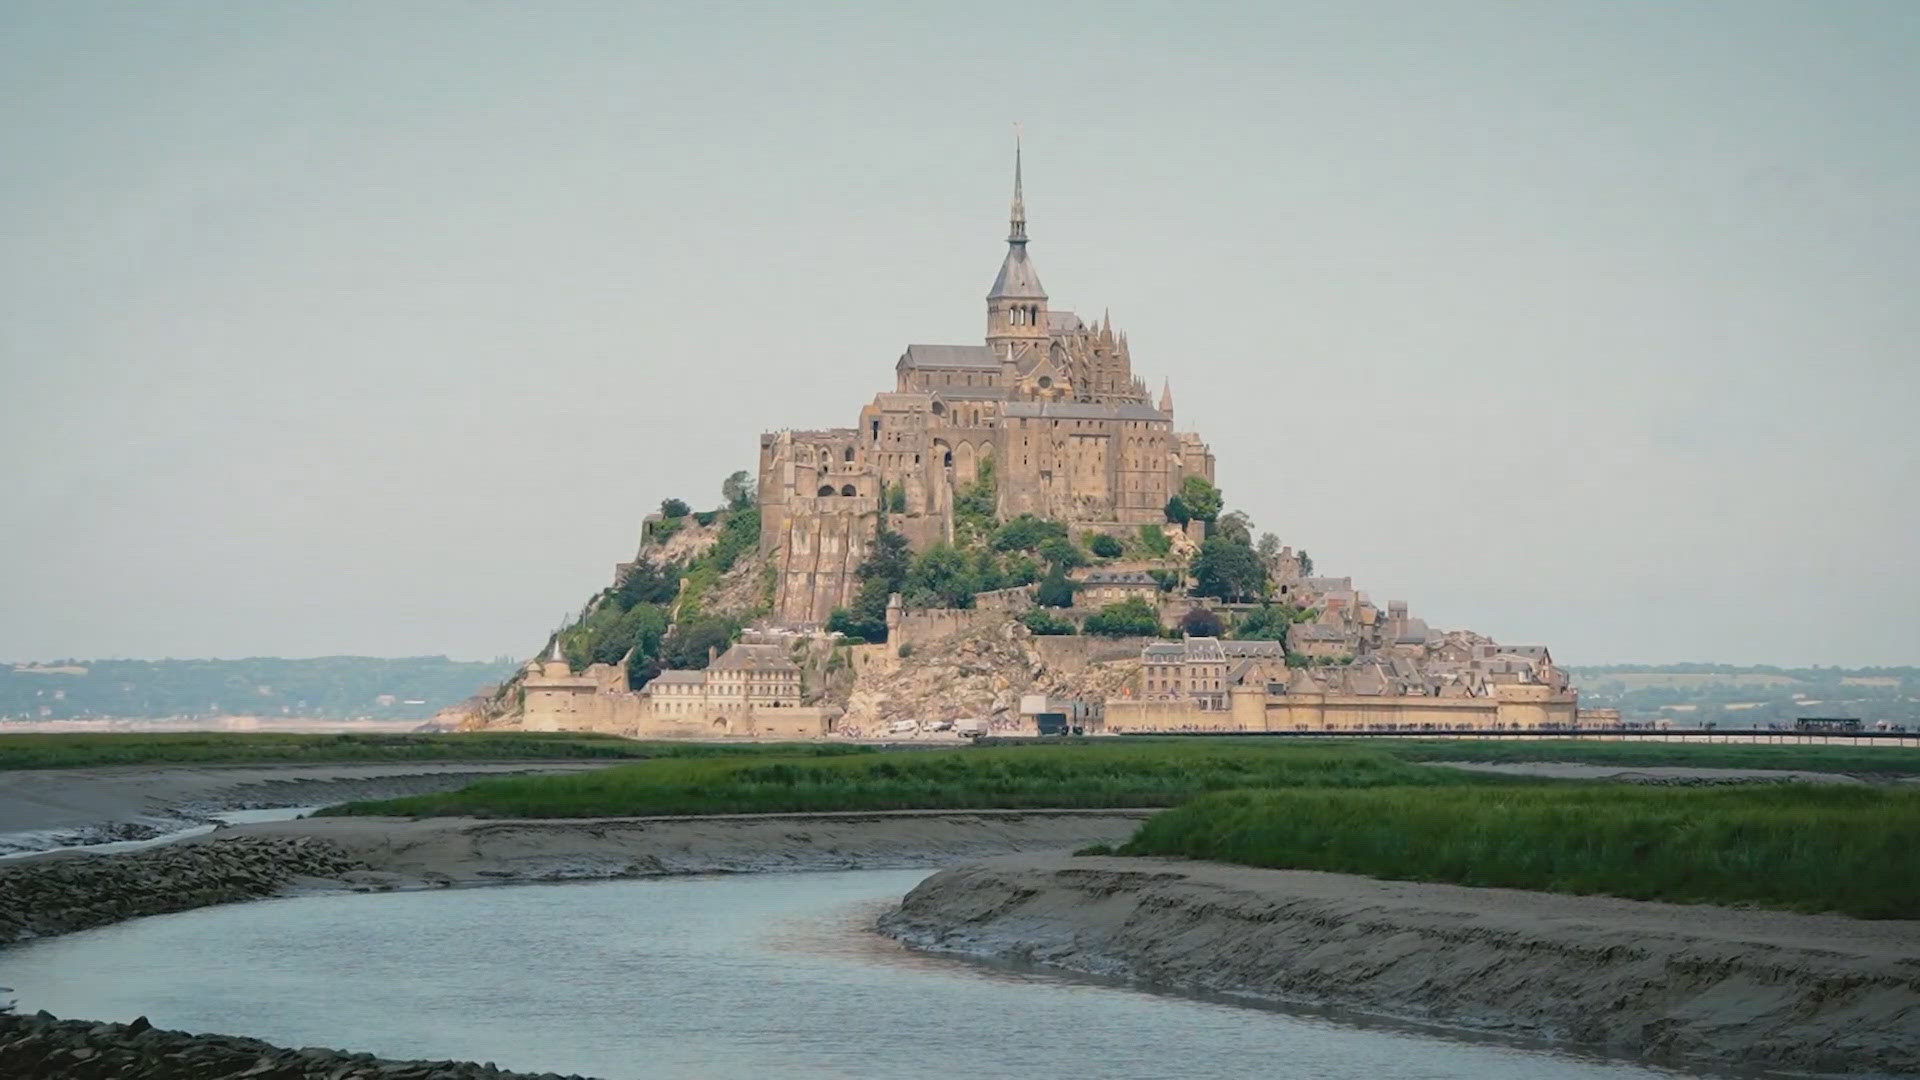 There are so many beautiful places to see in France, and that includes an incredible place on a tidal island that looks like a castle.